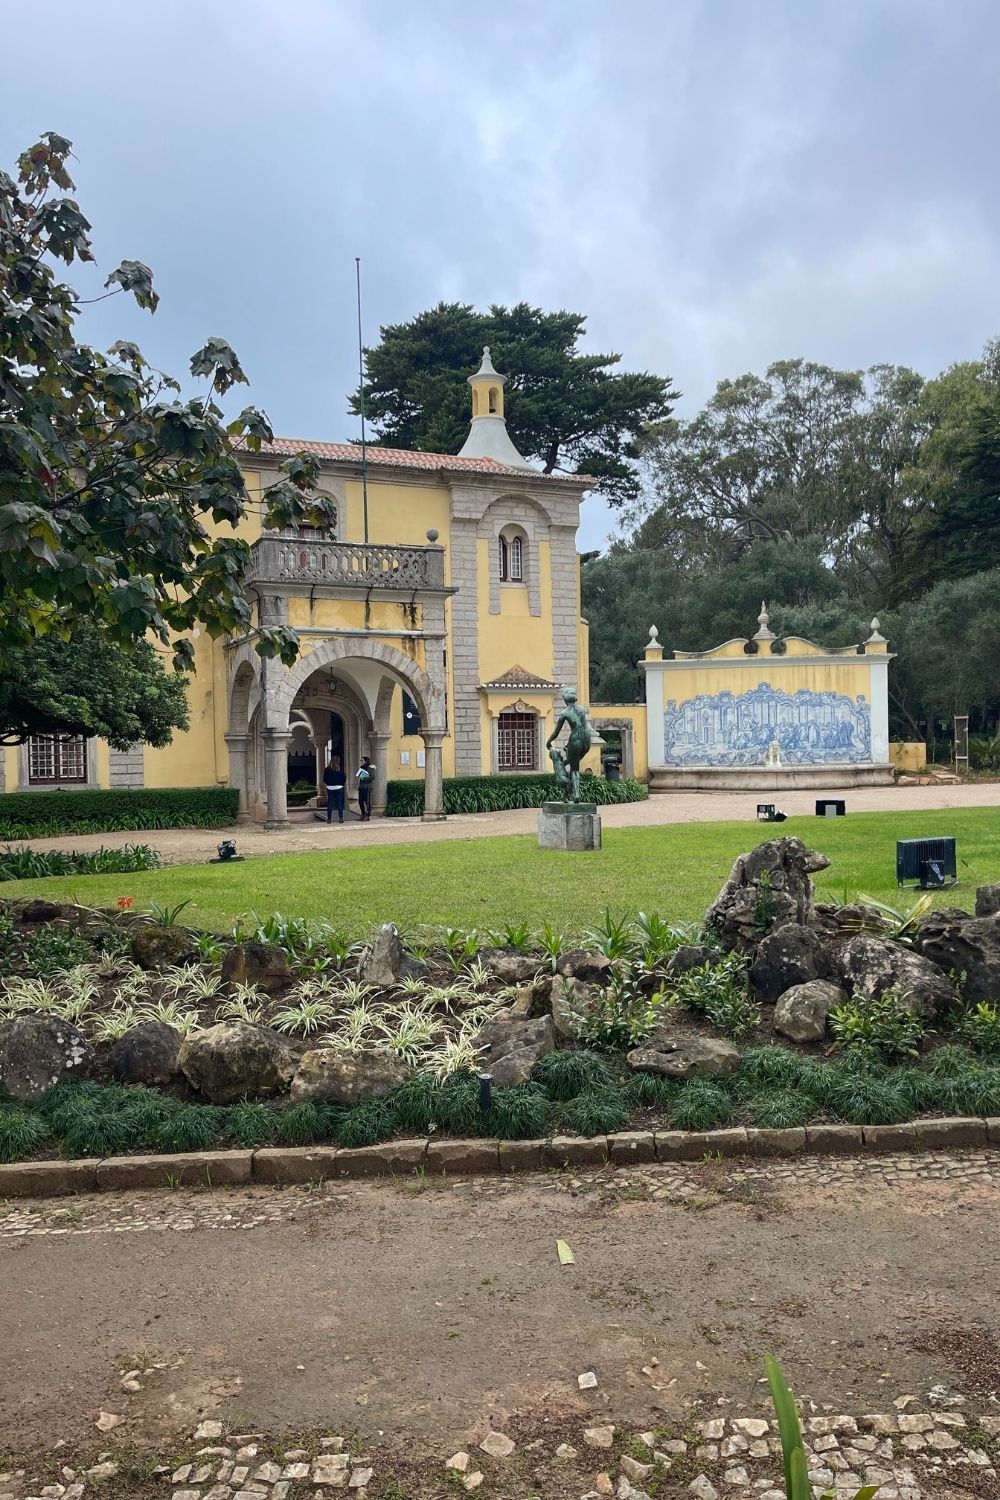 View of a historical yellow building with traditional Portuguese architecture, featuring azulejos (blue and white ceramic tiles) and a statue in the foreground garden, under a cloudy sky, capturing the essence of Cascais' cultural landscape.